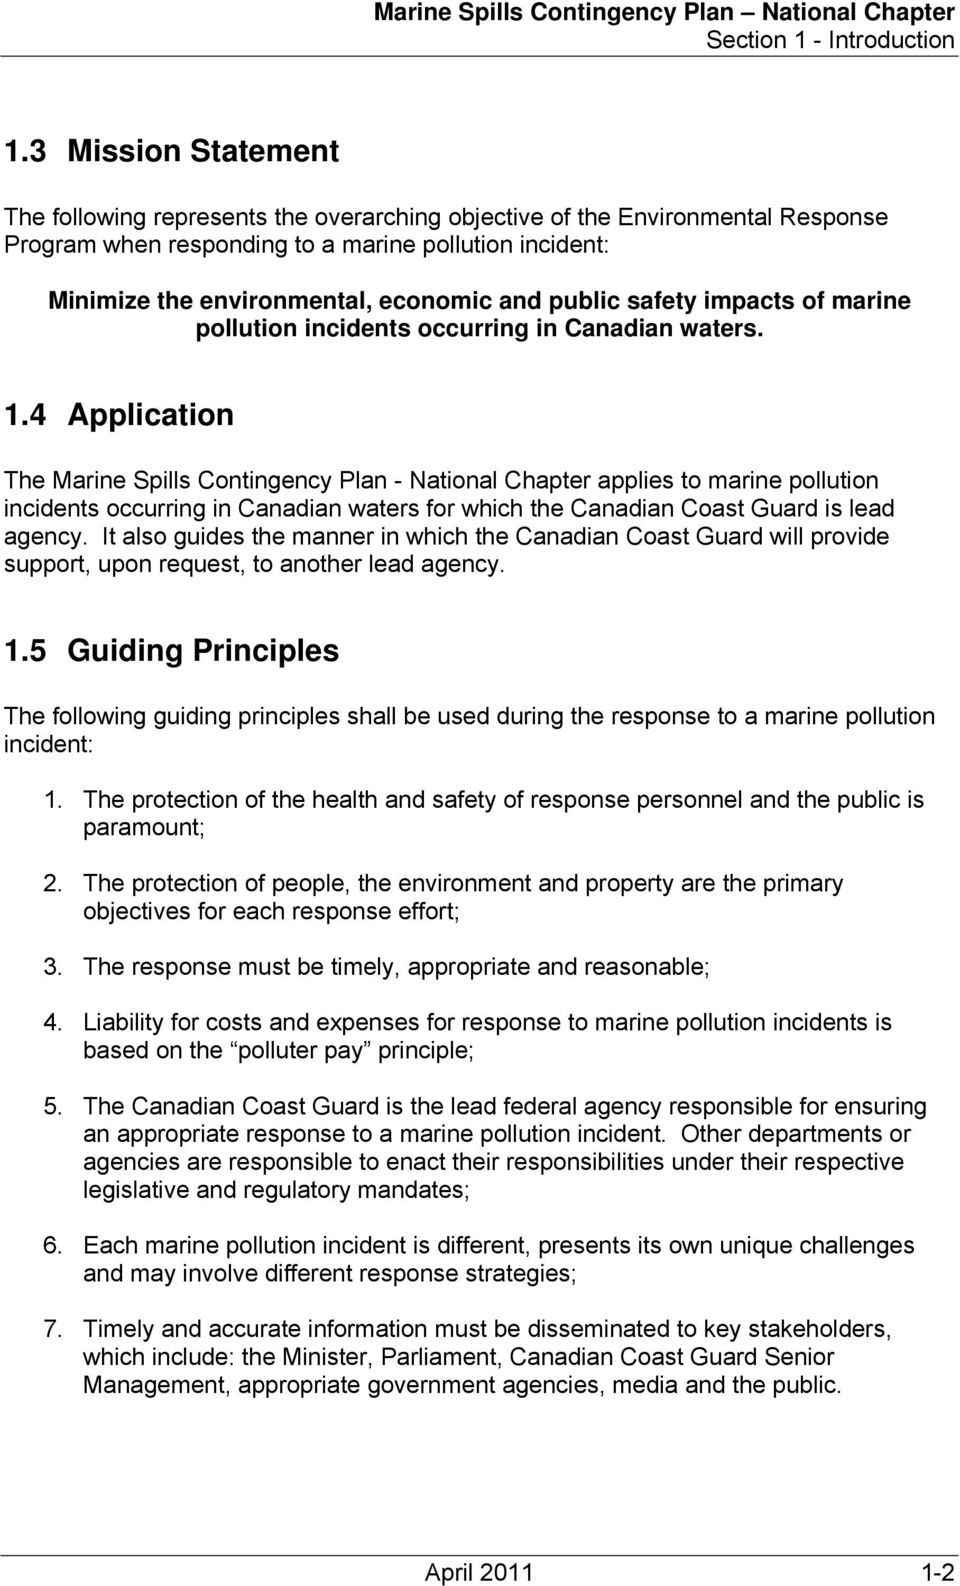 public safety impacts of marine pollution incidents occurring in Canadian waters. 1.